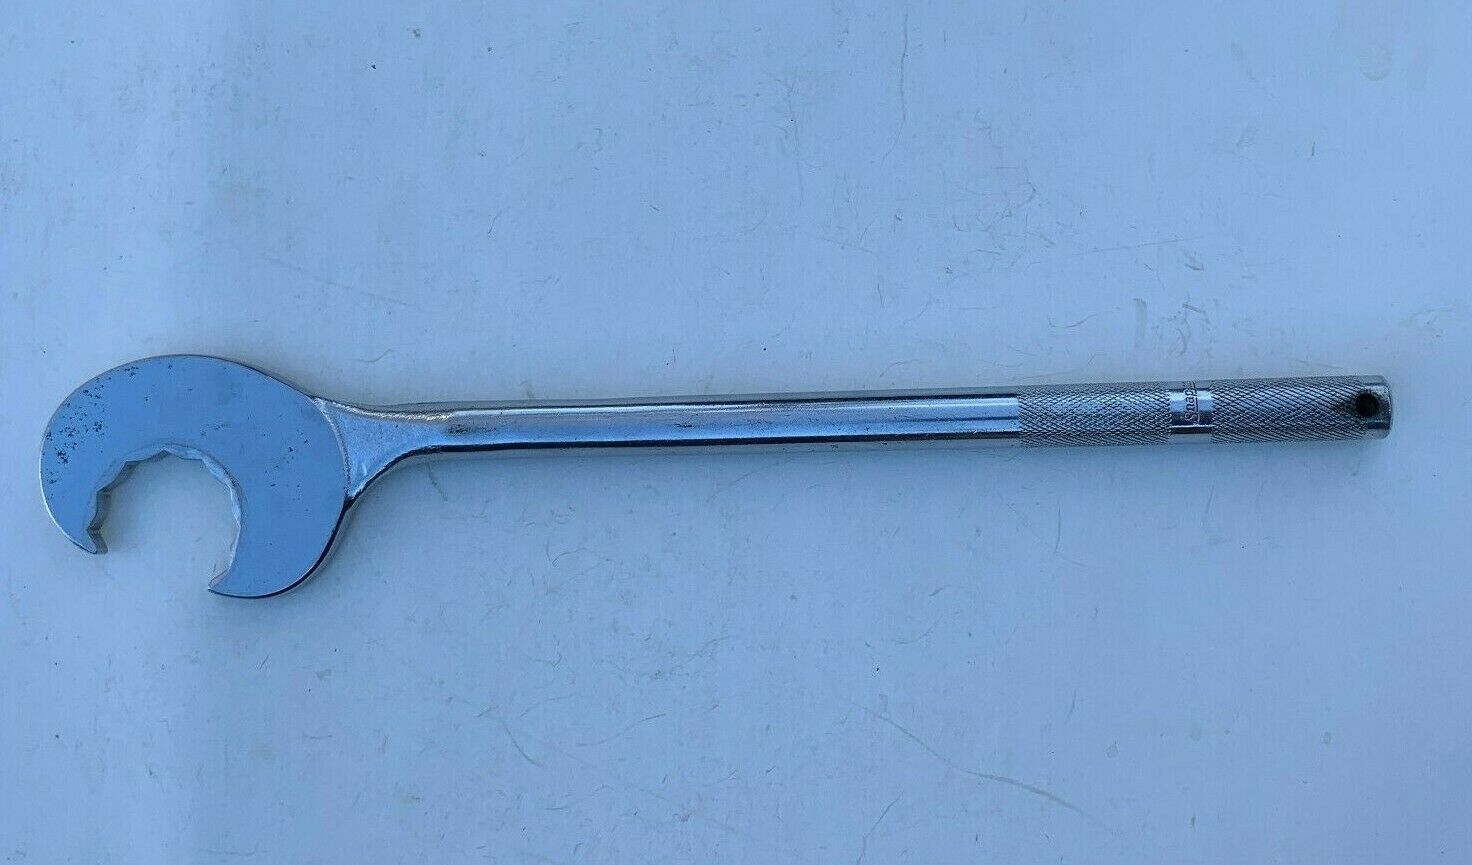 Snap on S5910 36 Alignment Wrench Vintage Tool, Made in USA